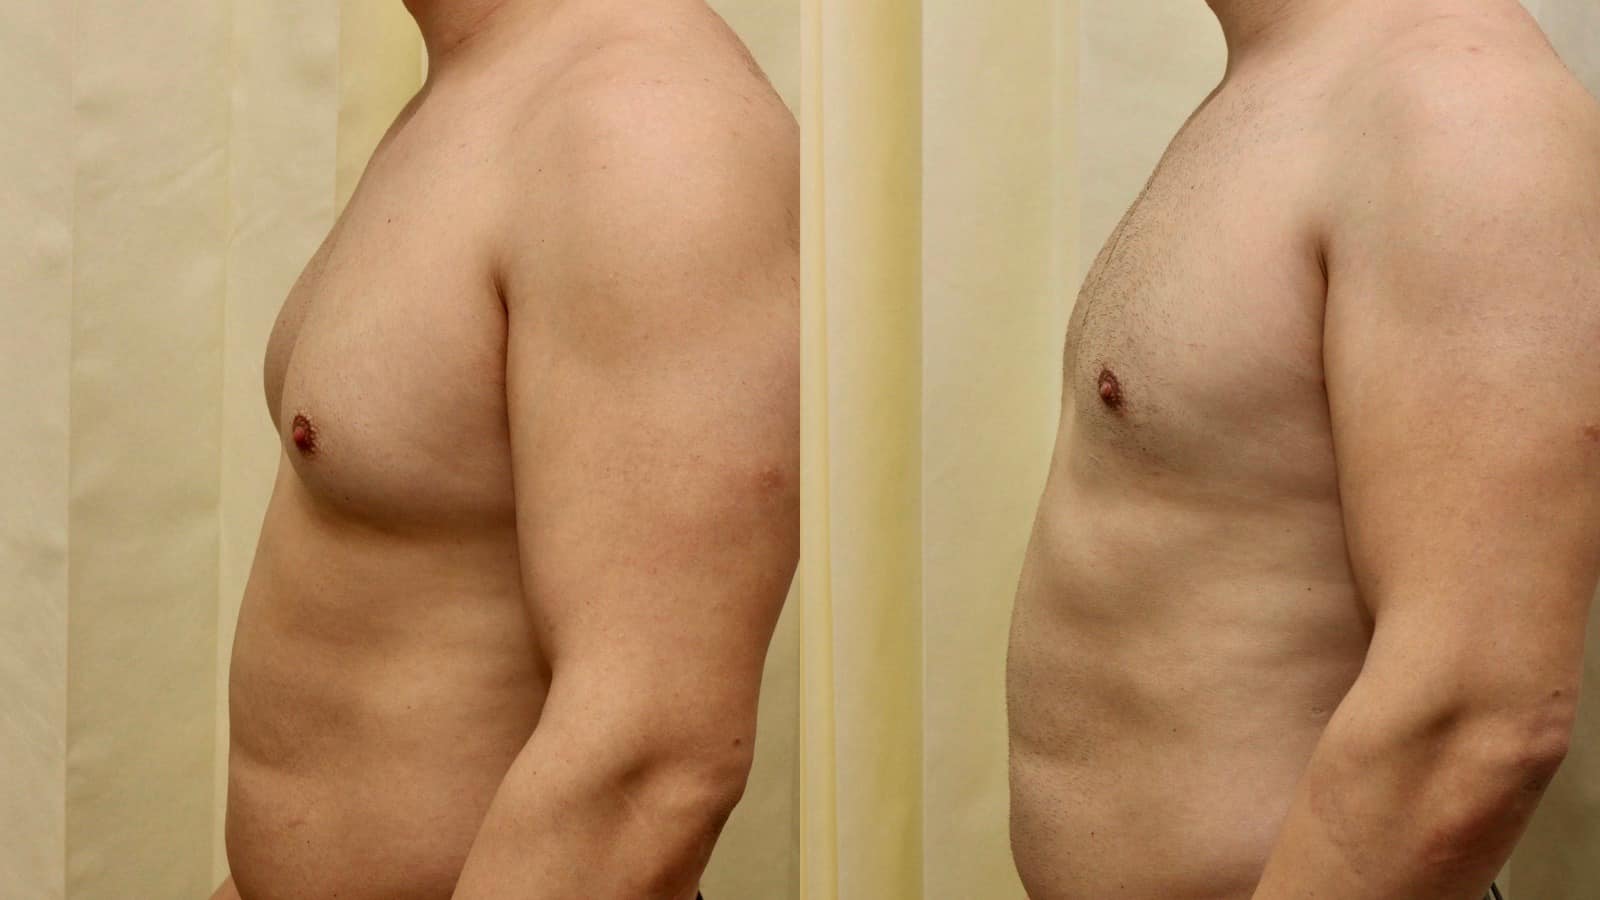 moob surgery before and after